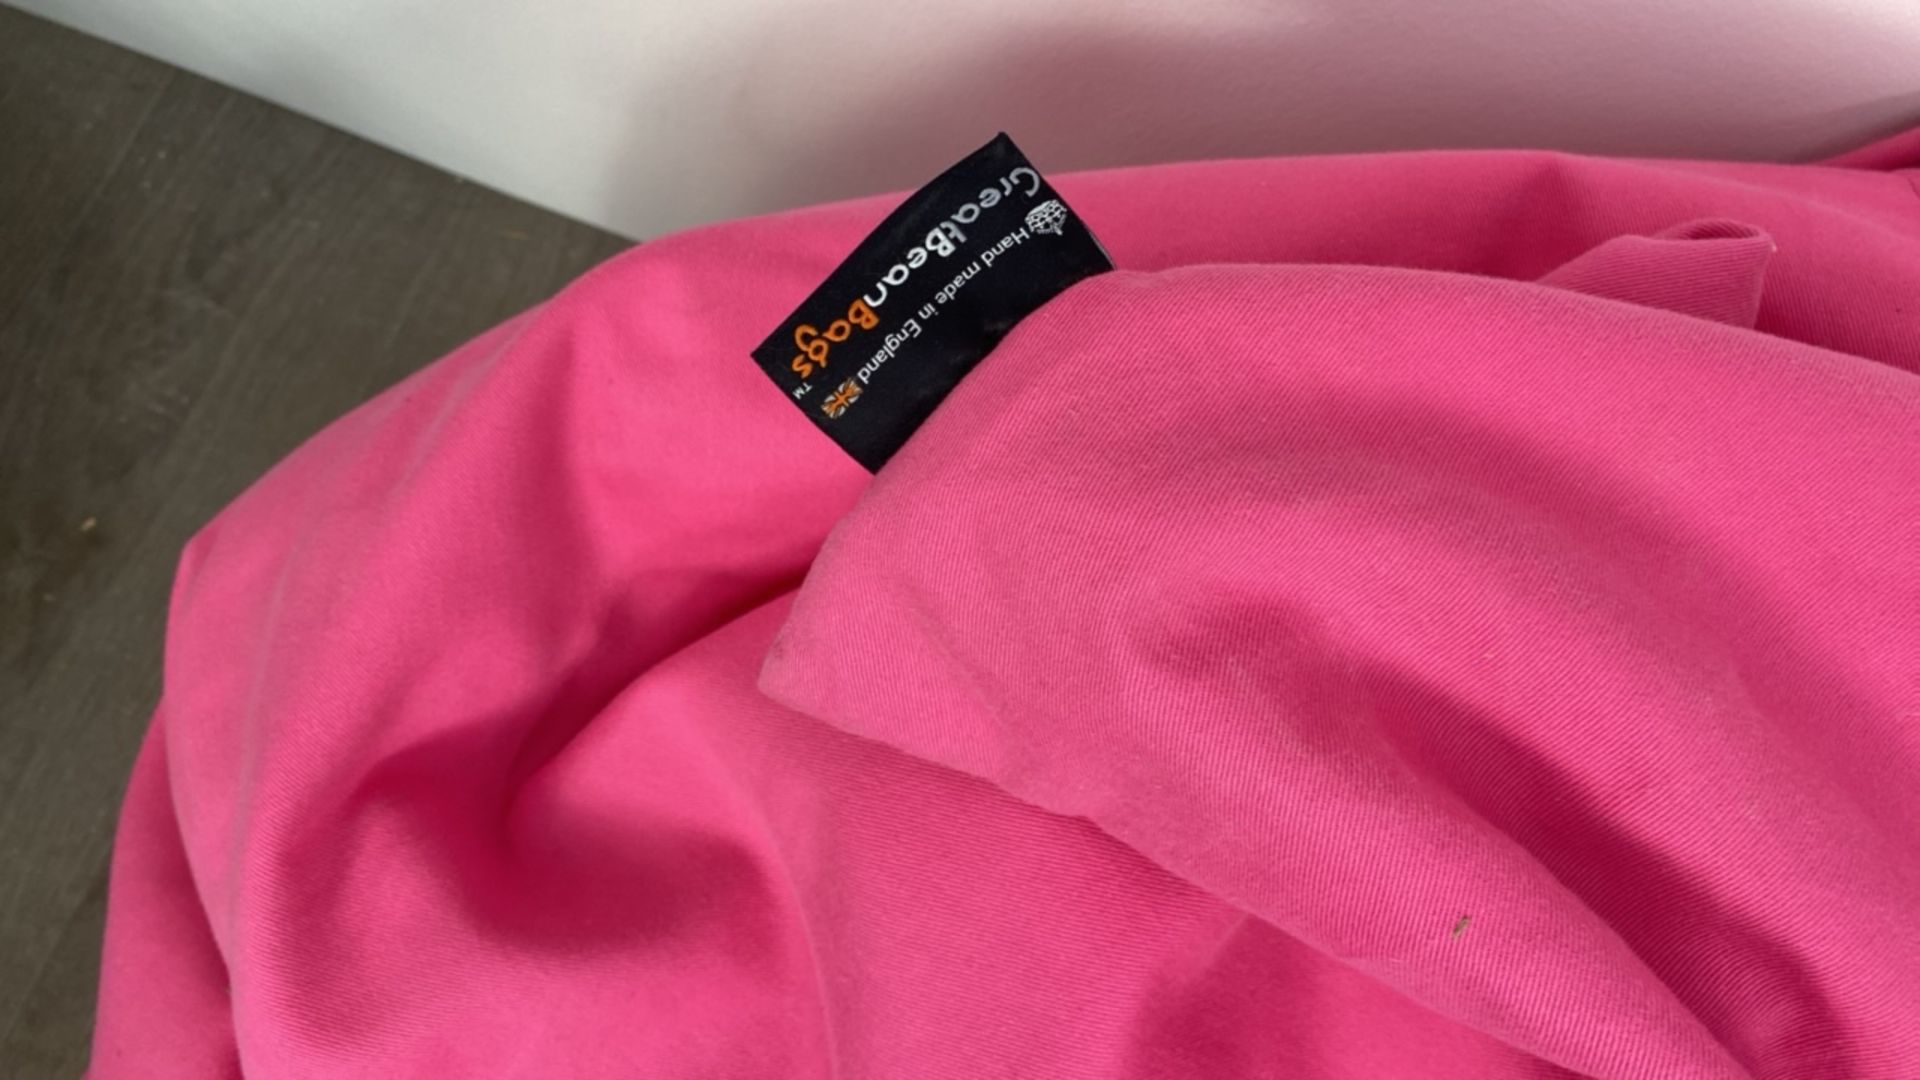 Pink Beanbag by GreatBeanbags - Image 2 of 2